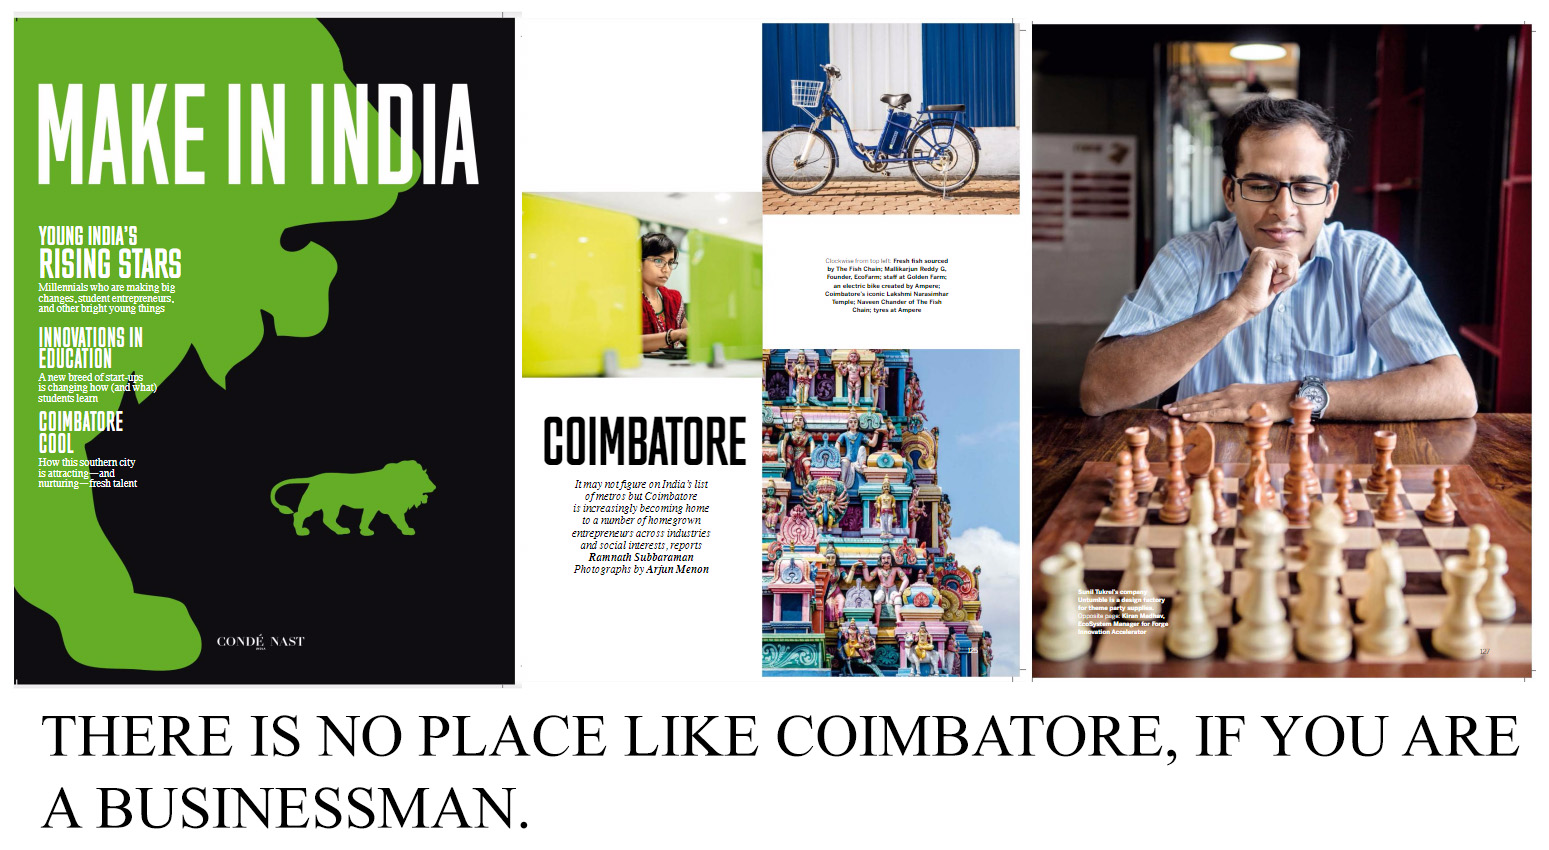 Make In India - Coimbatore Startups featured